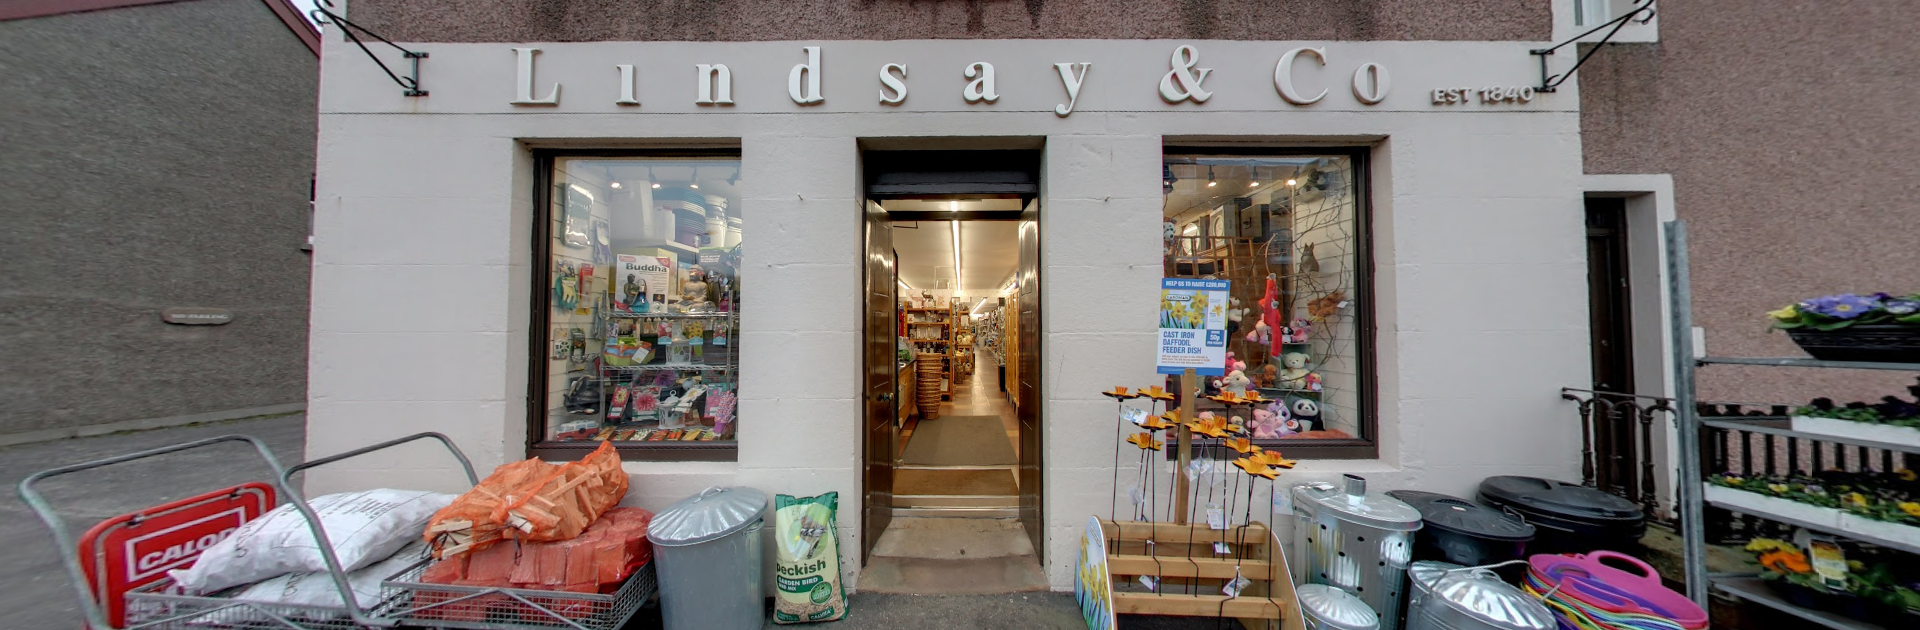 Lindsay and Co store front